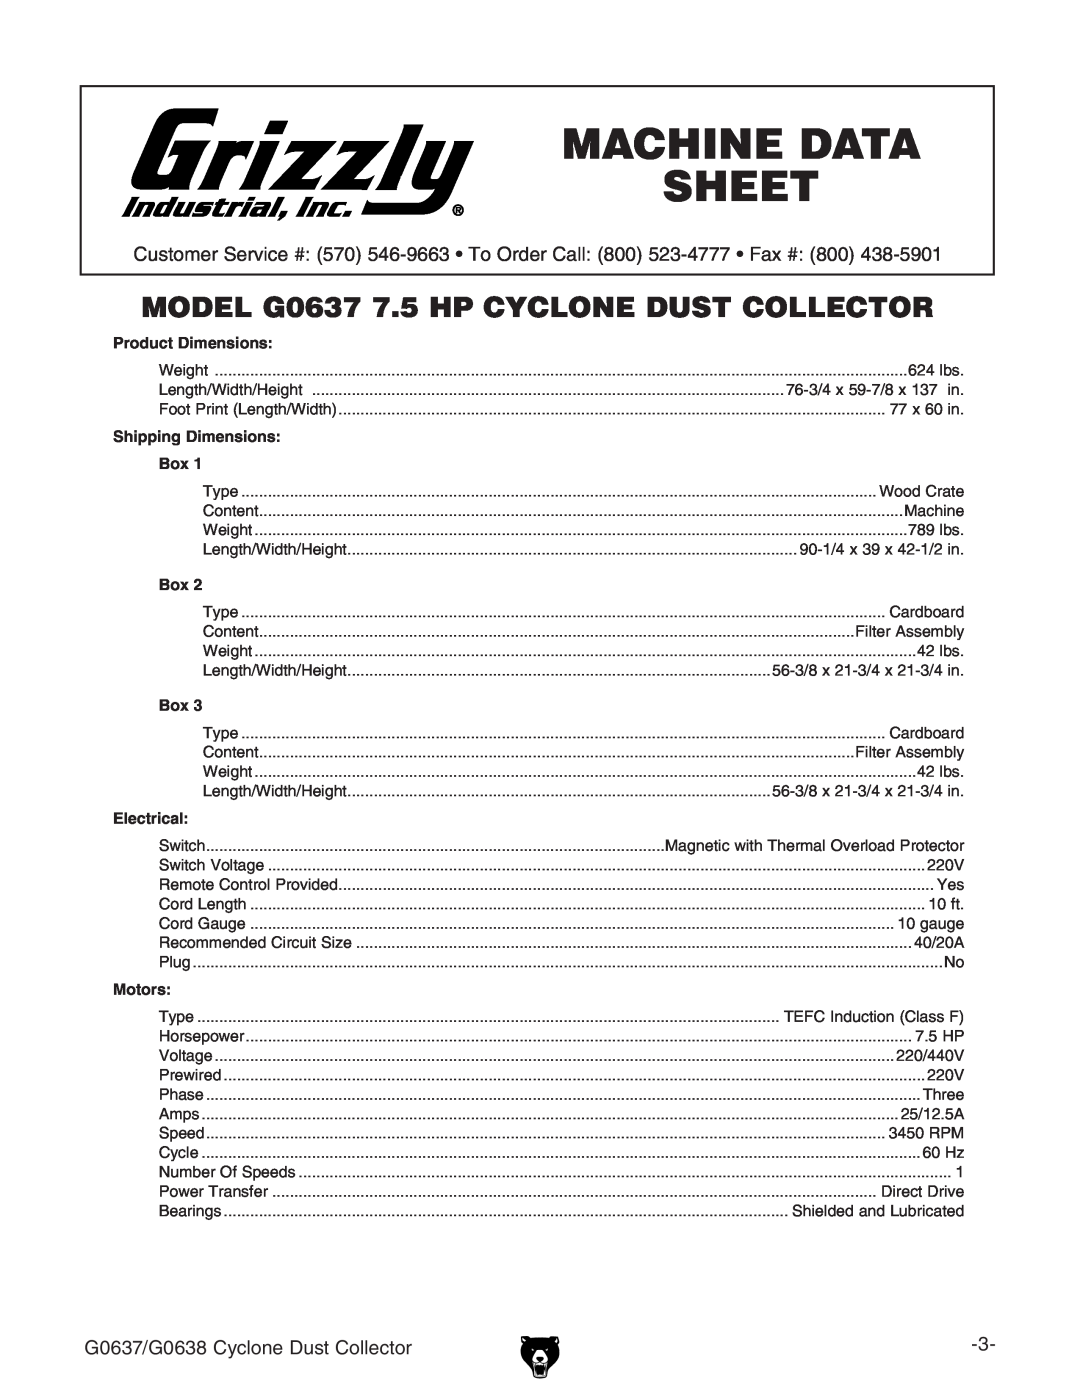 Grizzly owner manual G0637 Machine Data Sheet G0637 Data Sheet, G0637/G0638 Cyclone Dust Collector 